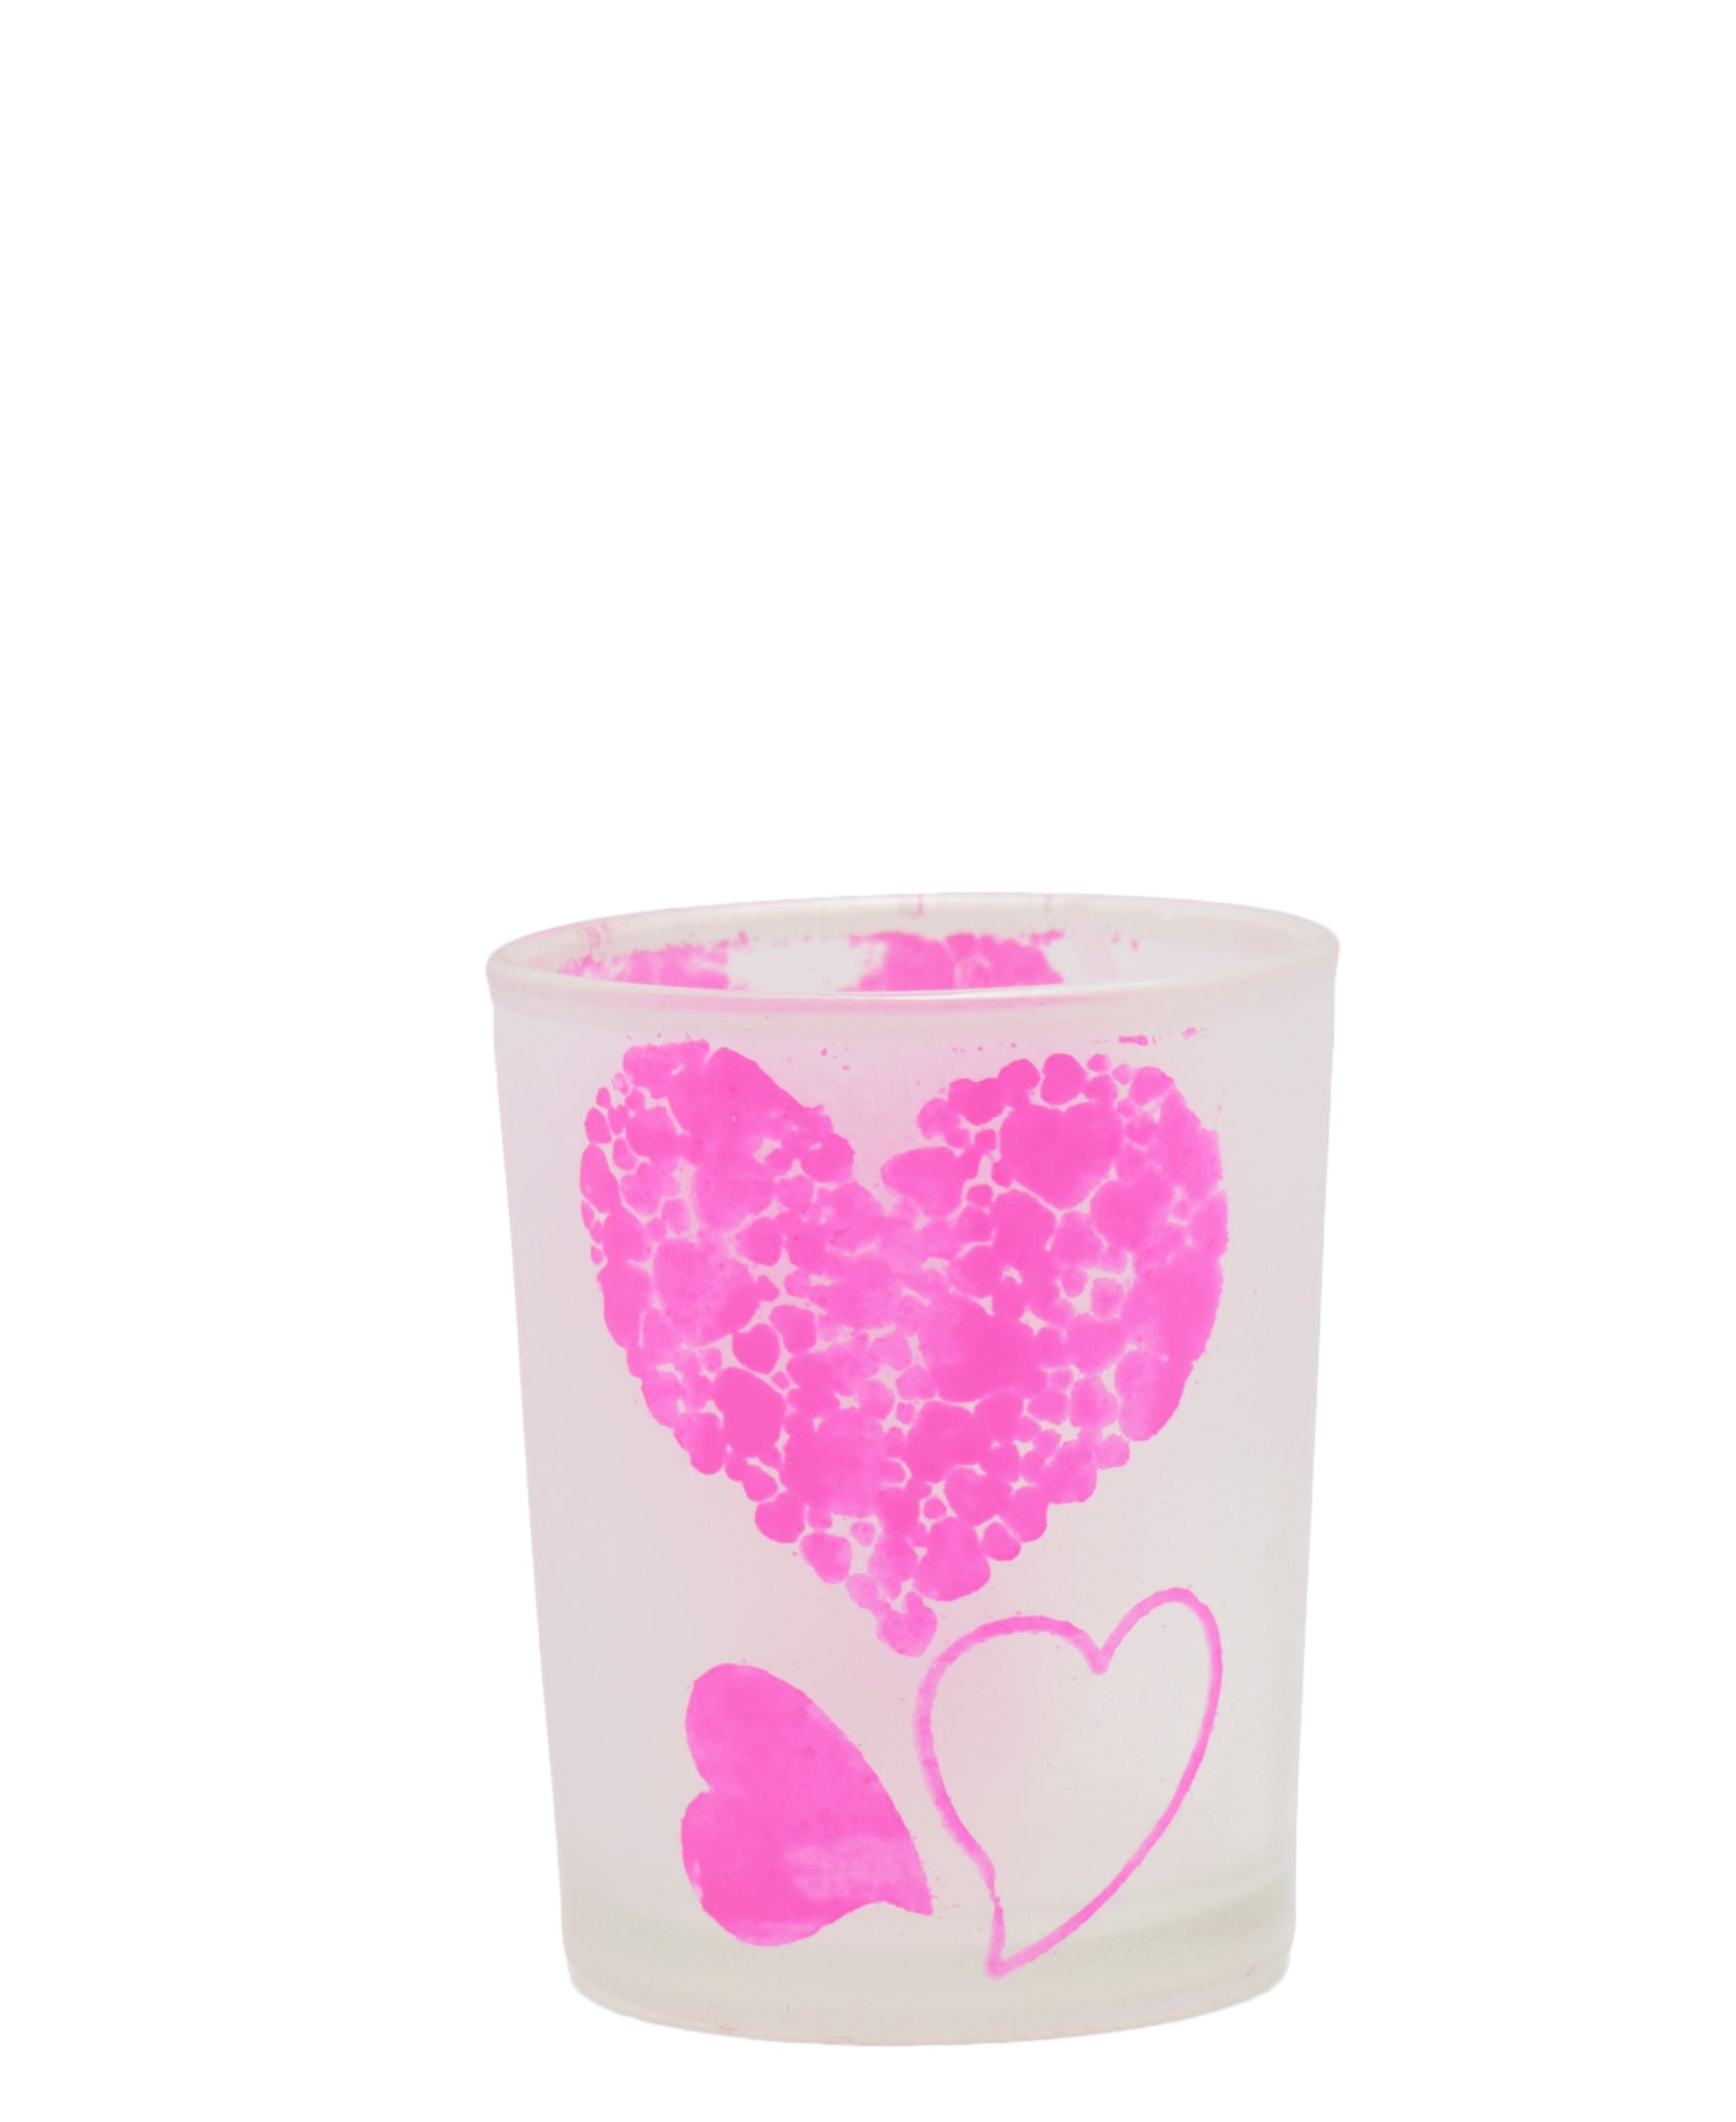 Heavenly Candle Holder Set 5 Piece - Pink